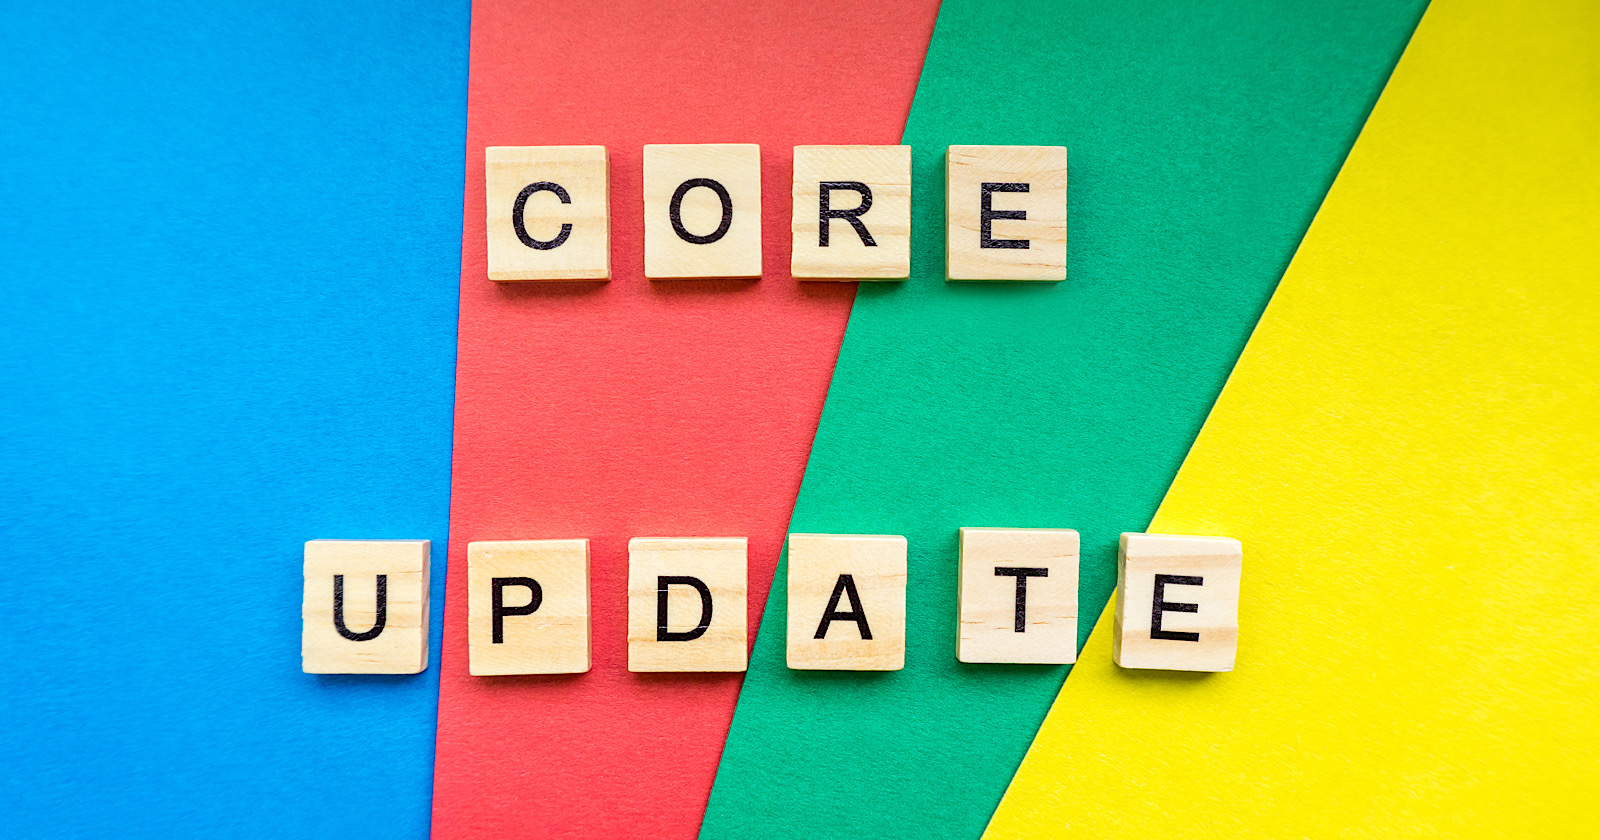 Core update text made with wooden letters on colorful background.